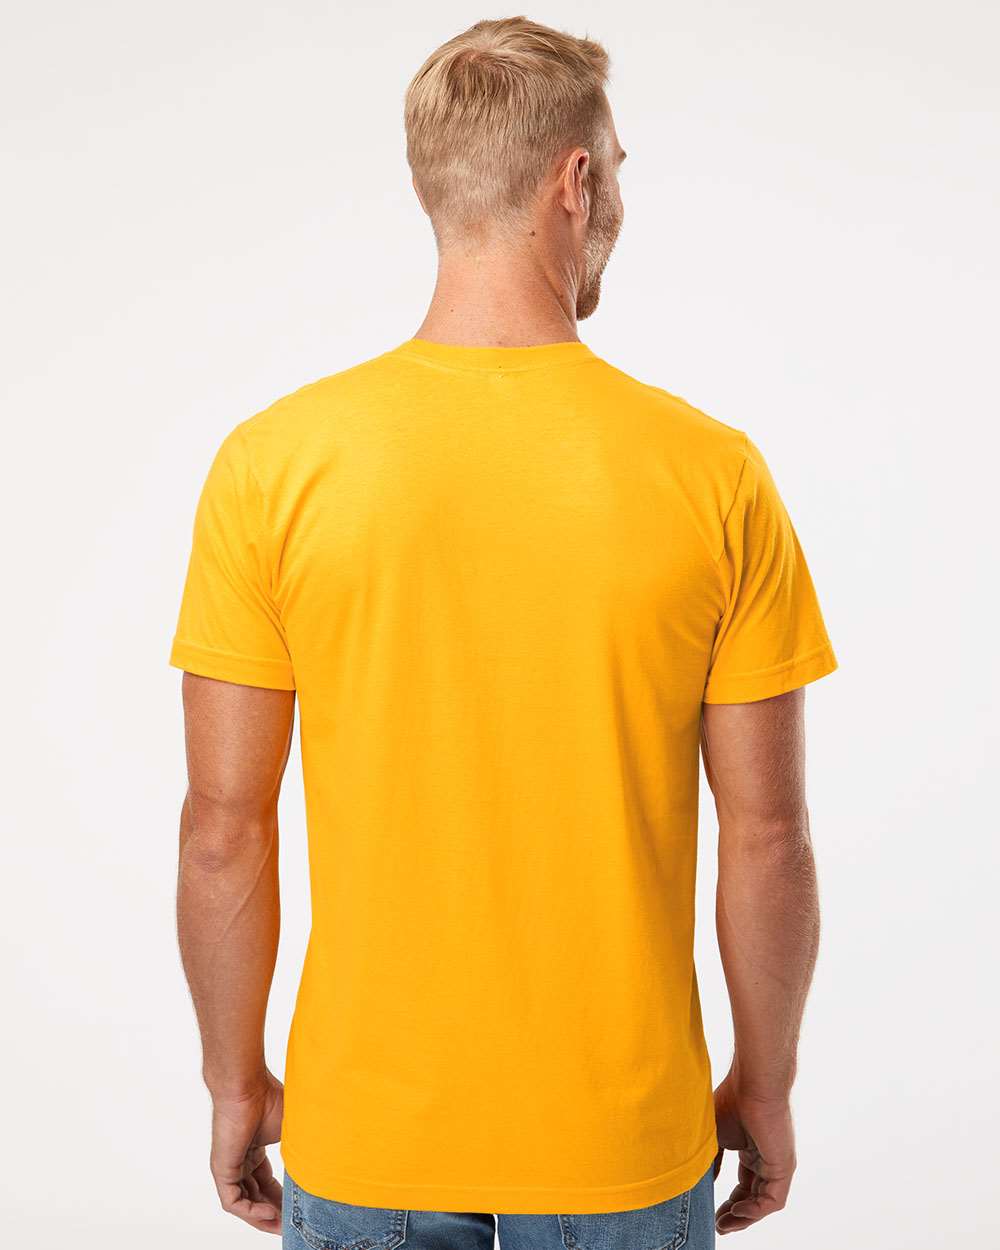 American Apparel Fine Jersey Tee 2001 #colormdl_Gold